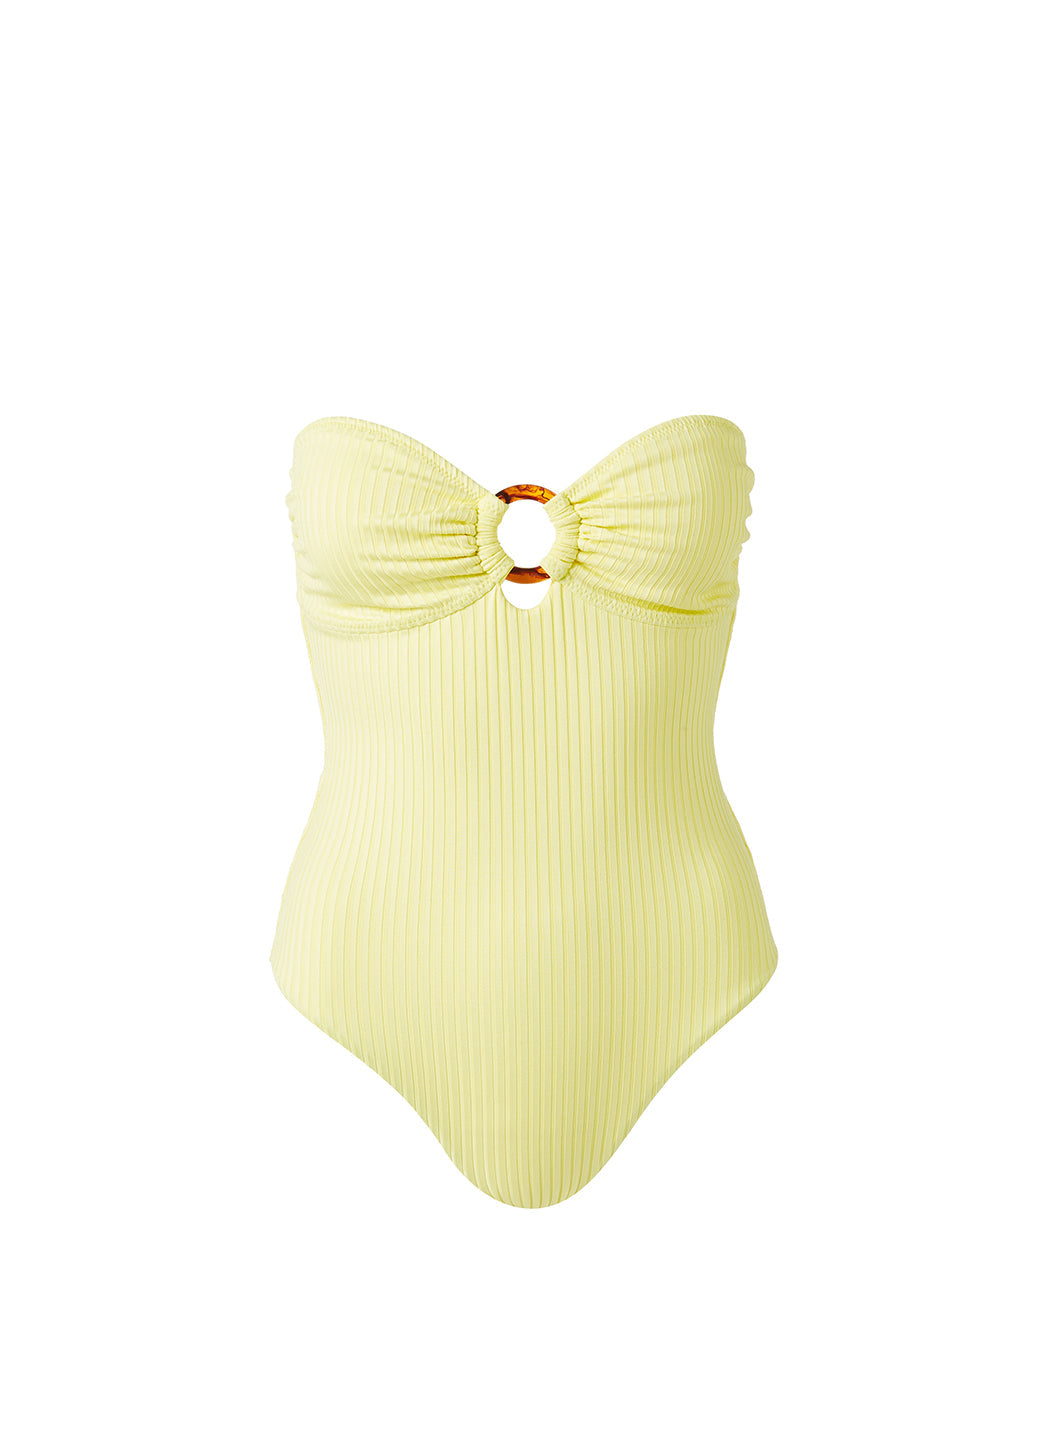 Melissa Odabash One Piece Swimsuits | Official Website